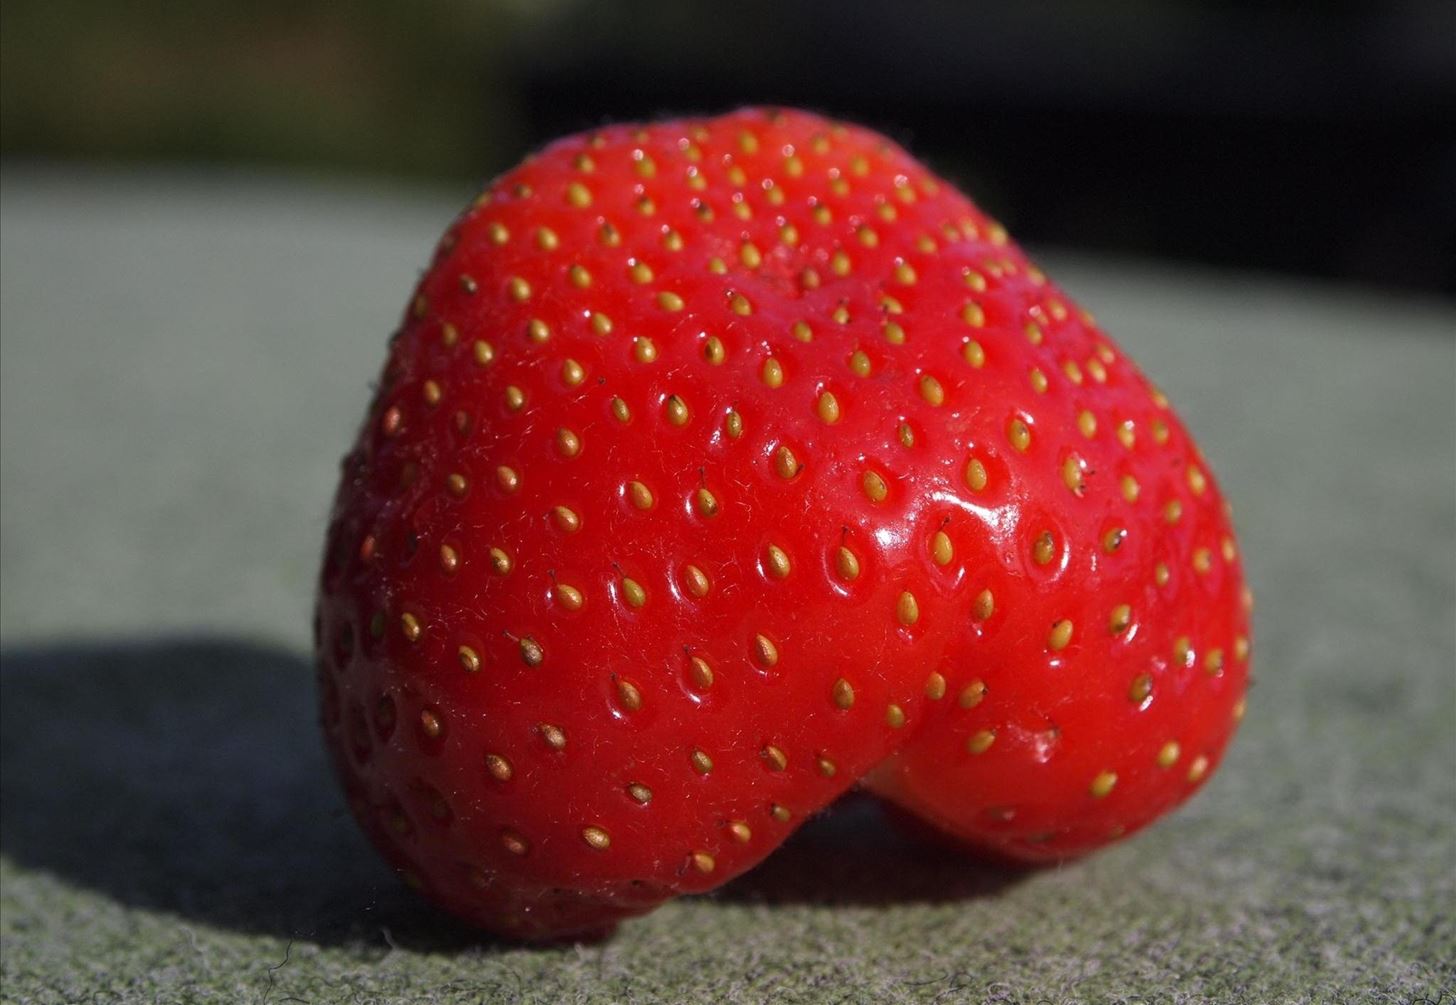 How to Extract DNA from a Strawberry with Basic Kitchen Items